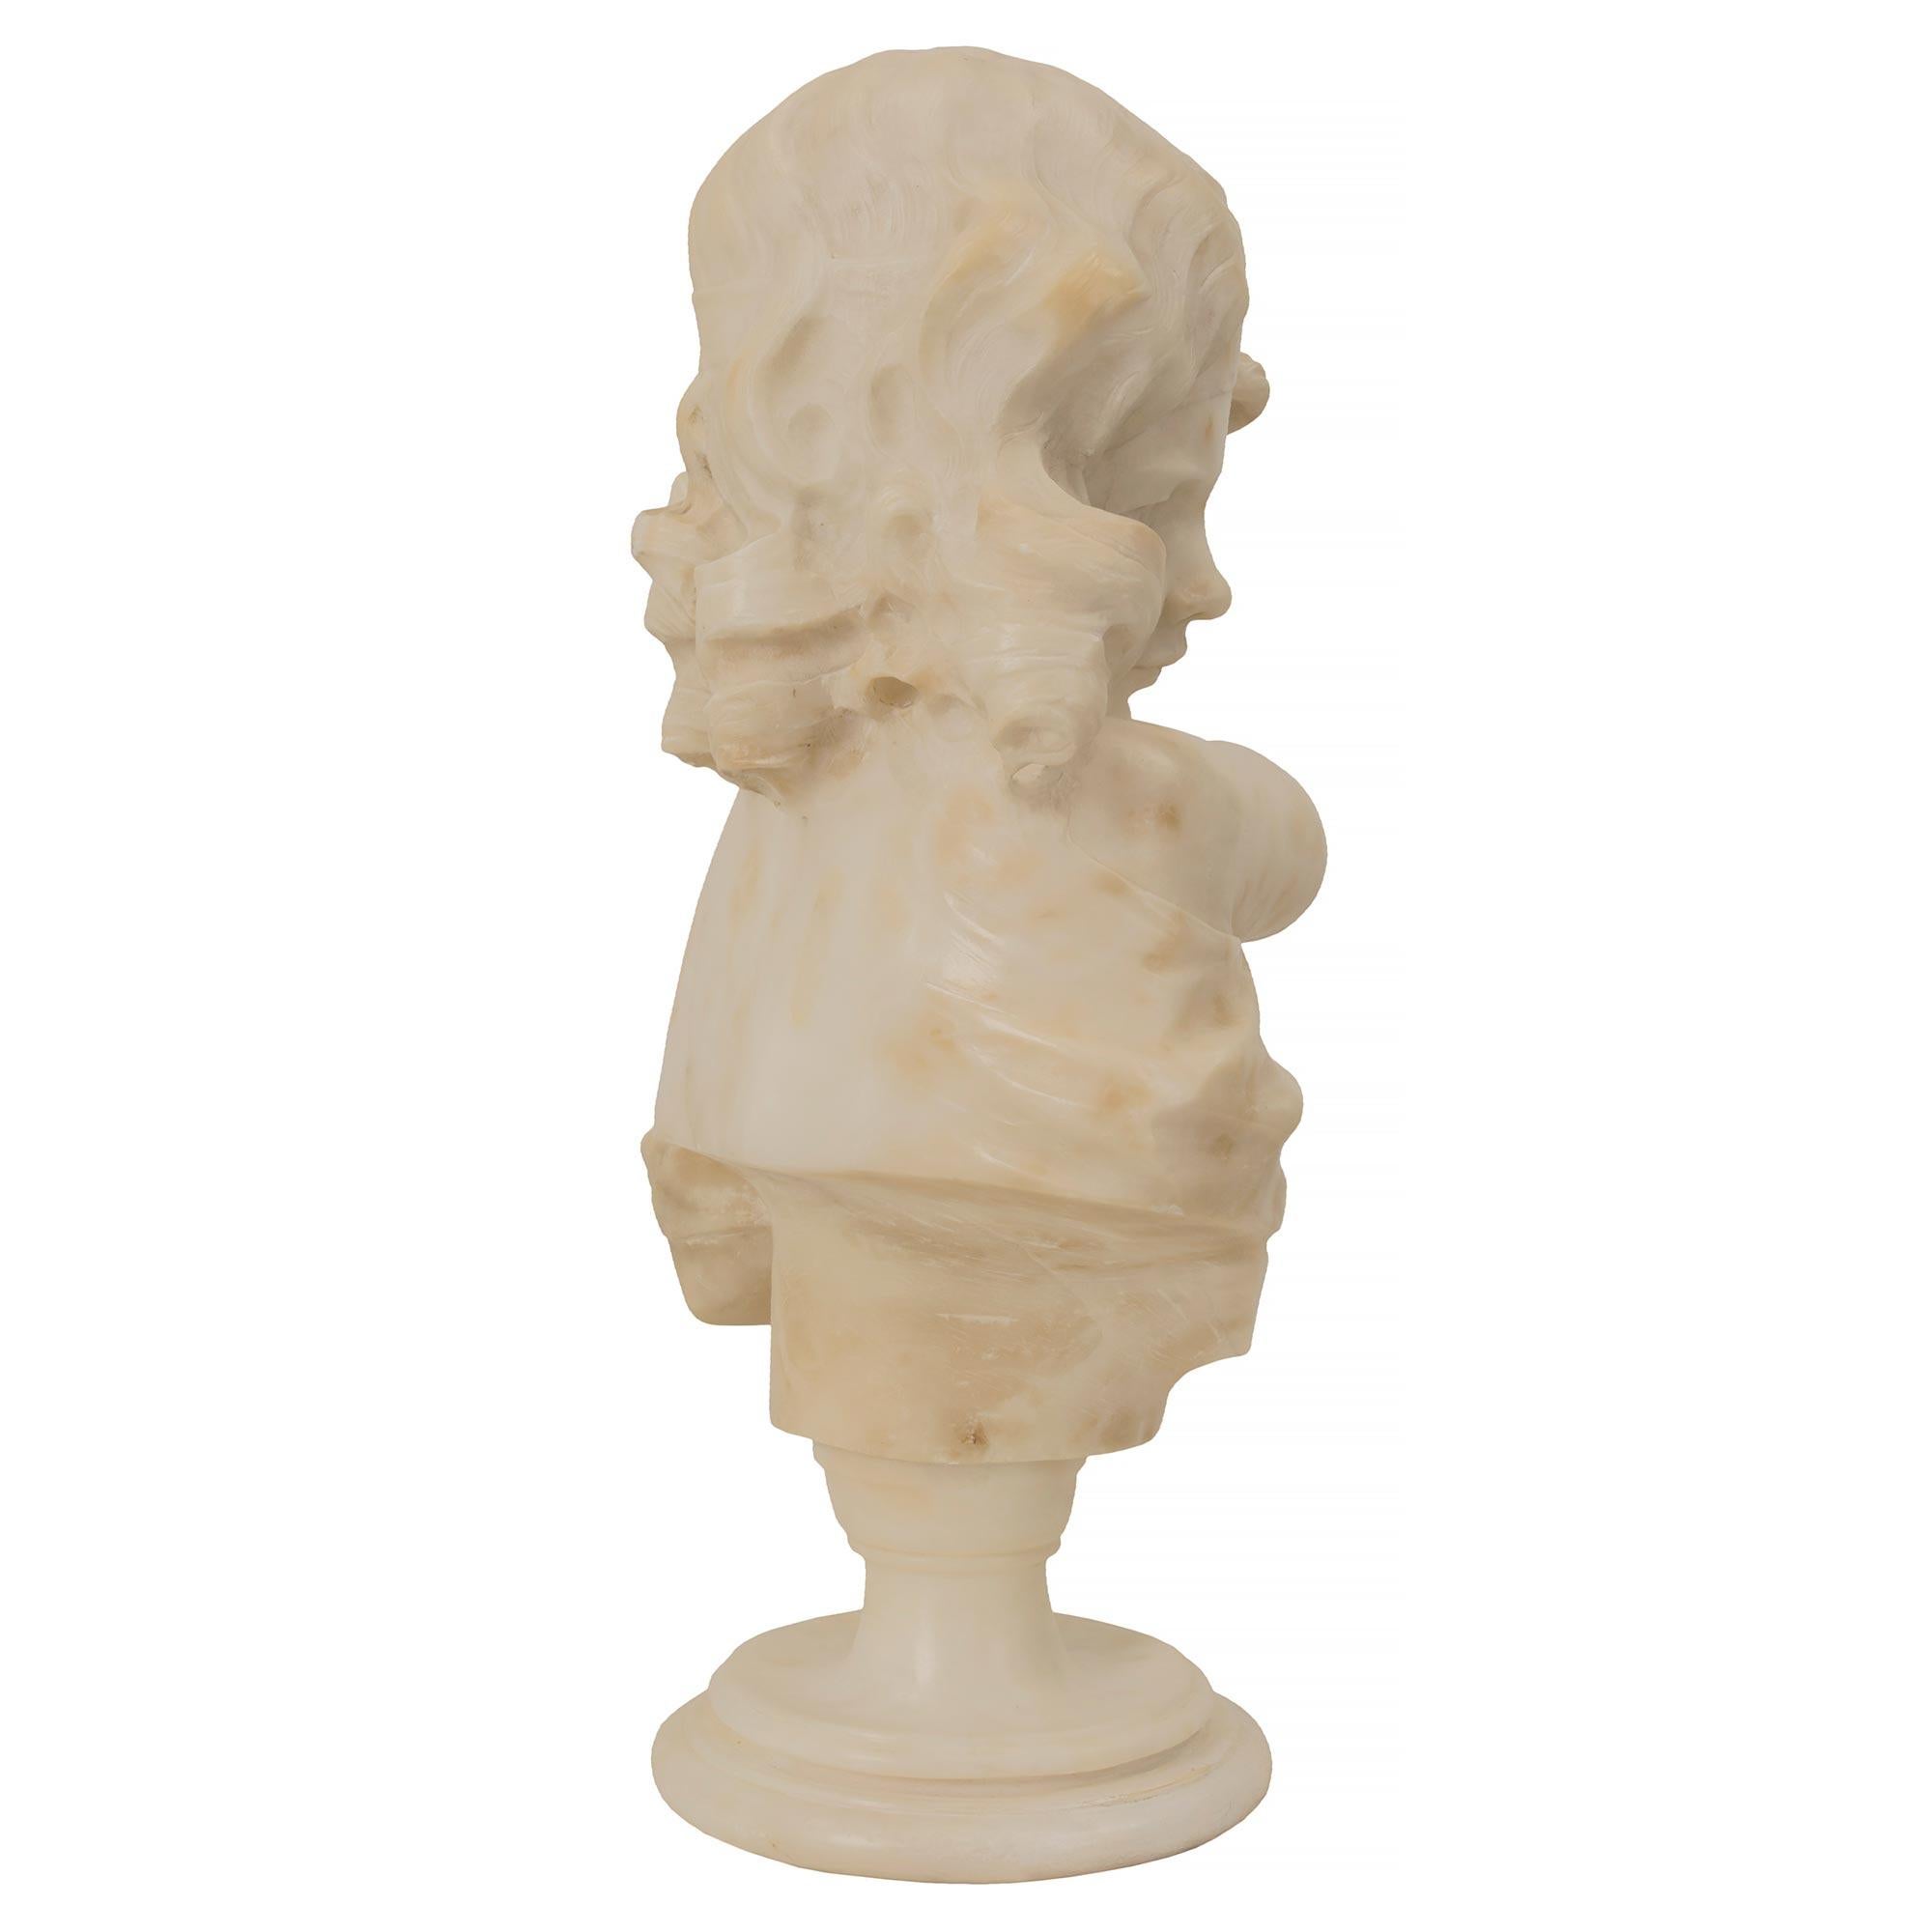 A beautiful French 19th century Alabaster bust of young lady. The bust is raised by a circular mottled base below the socle shaped pedestal. The lovely maiden is holding a quiver with arrows in one hand and has her other arm raised in front of her.